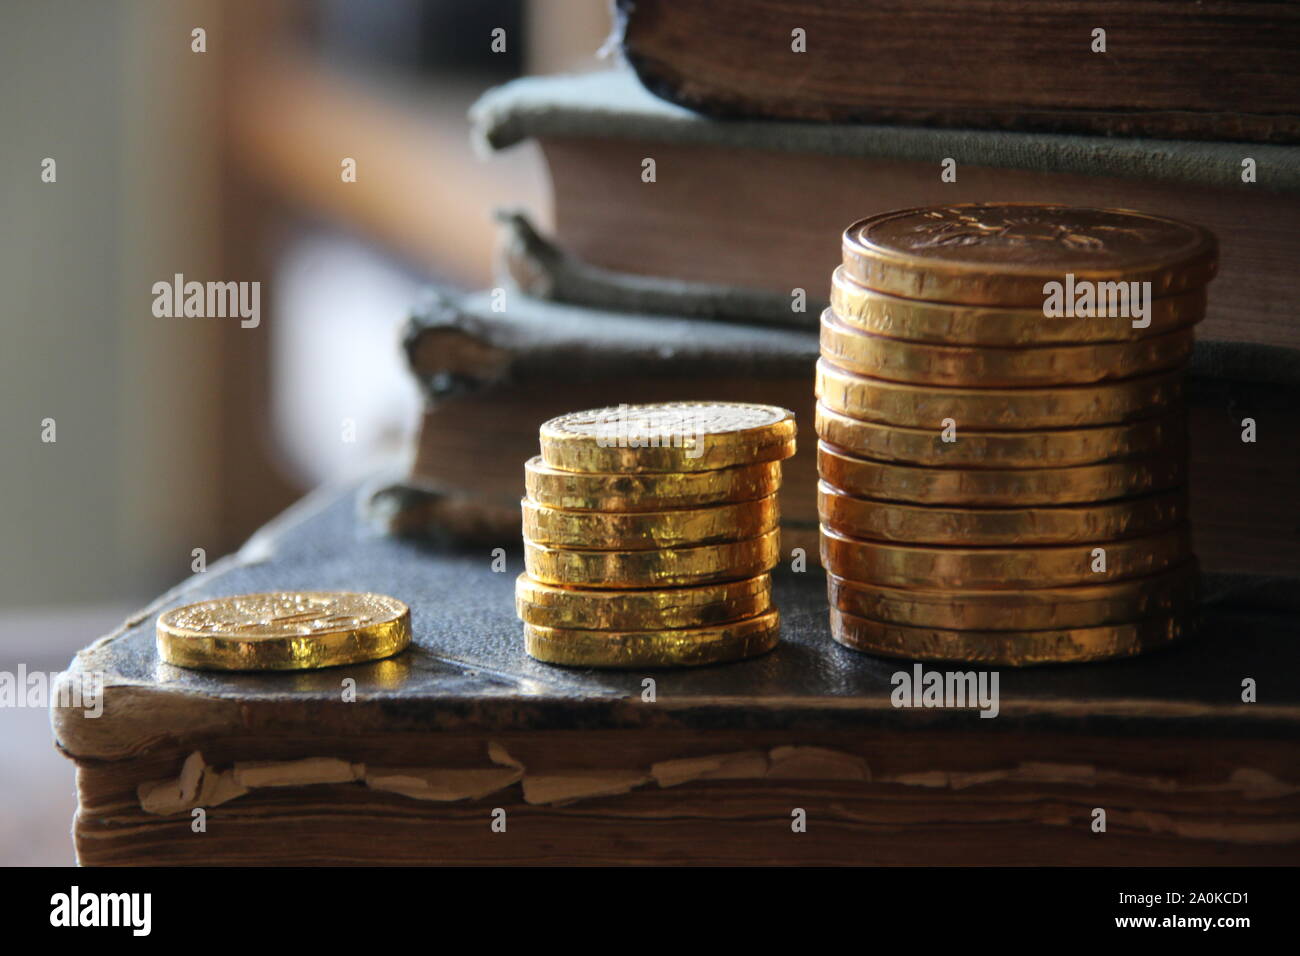 Money growth idea. Stacks of gold coins and vintage books. Stock Photo